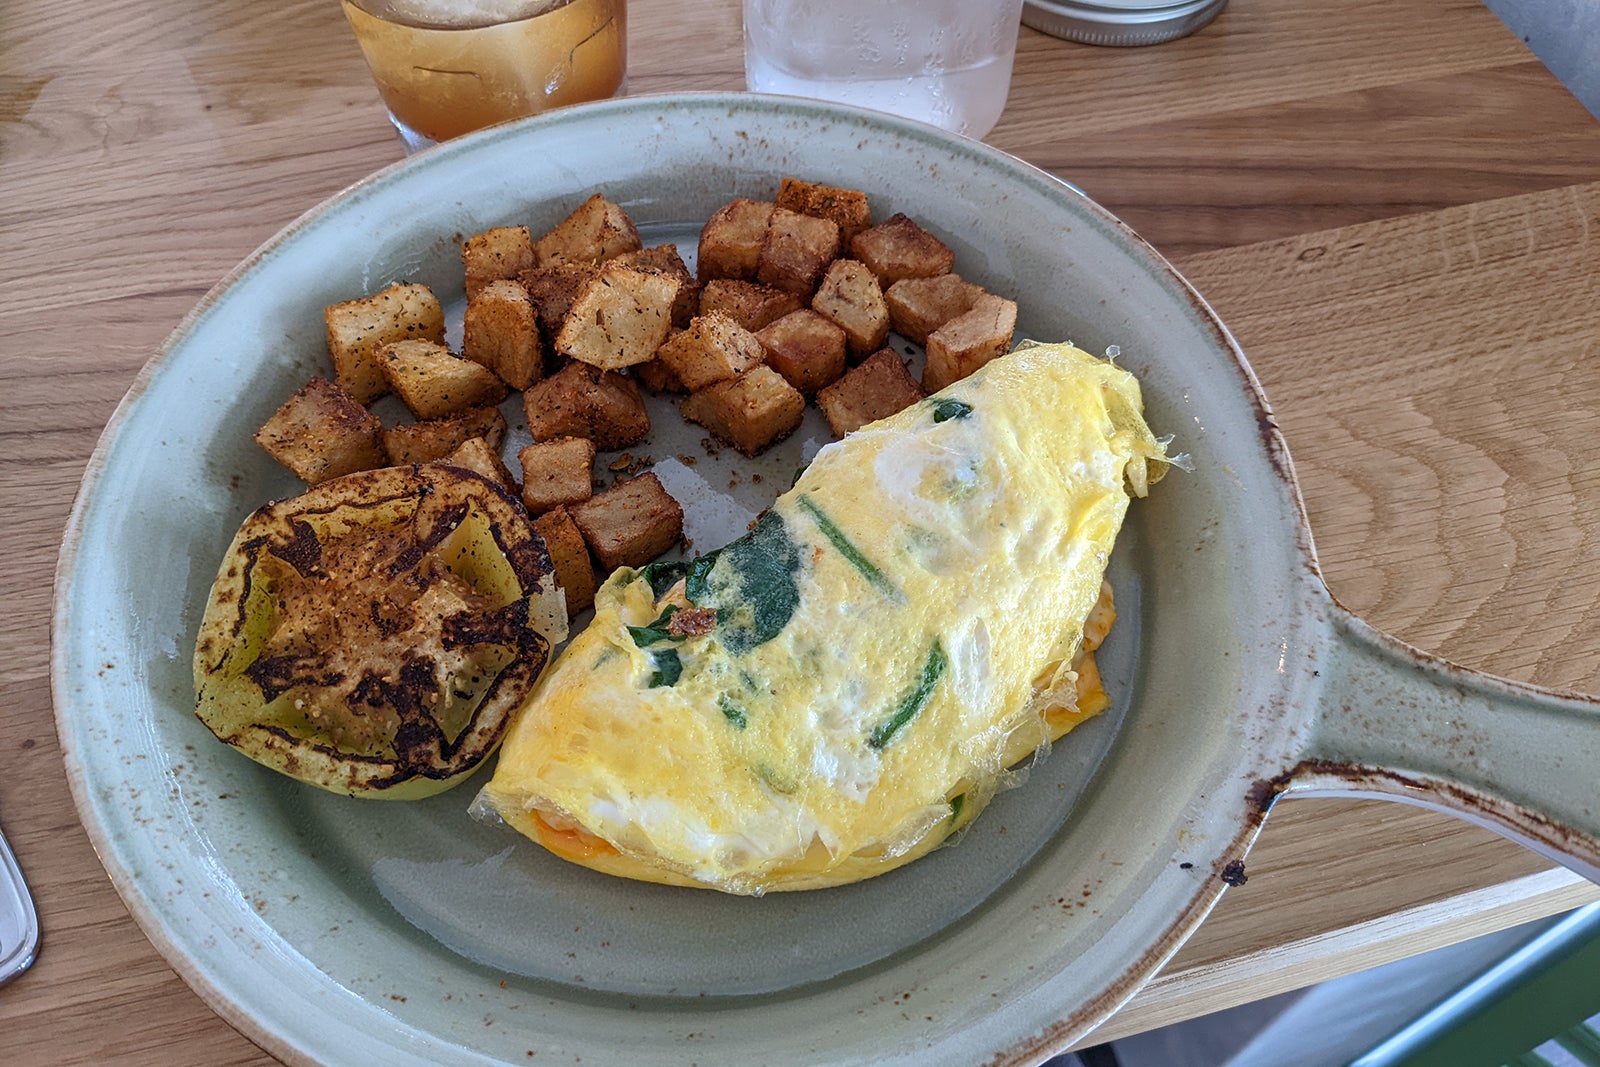 Omelet and potatoes on a plate